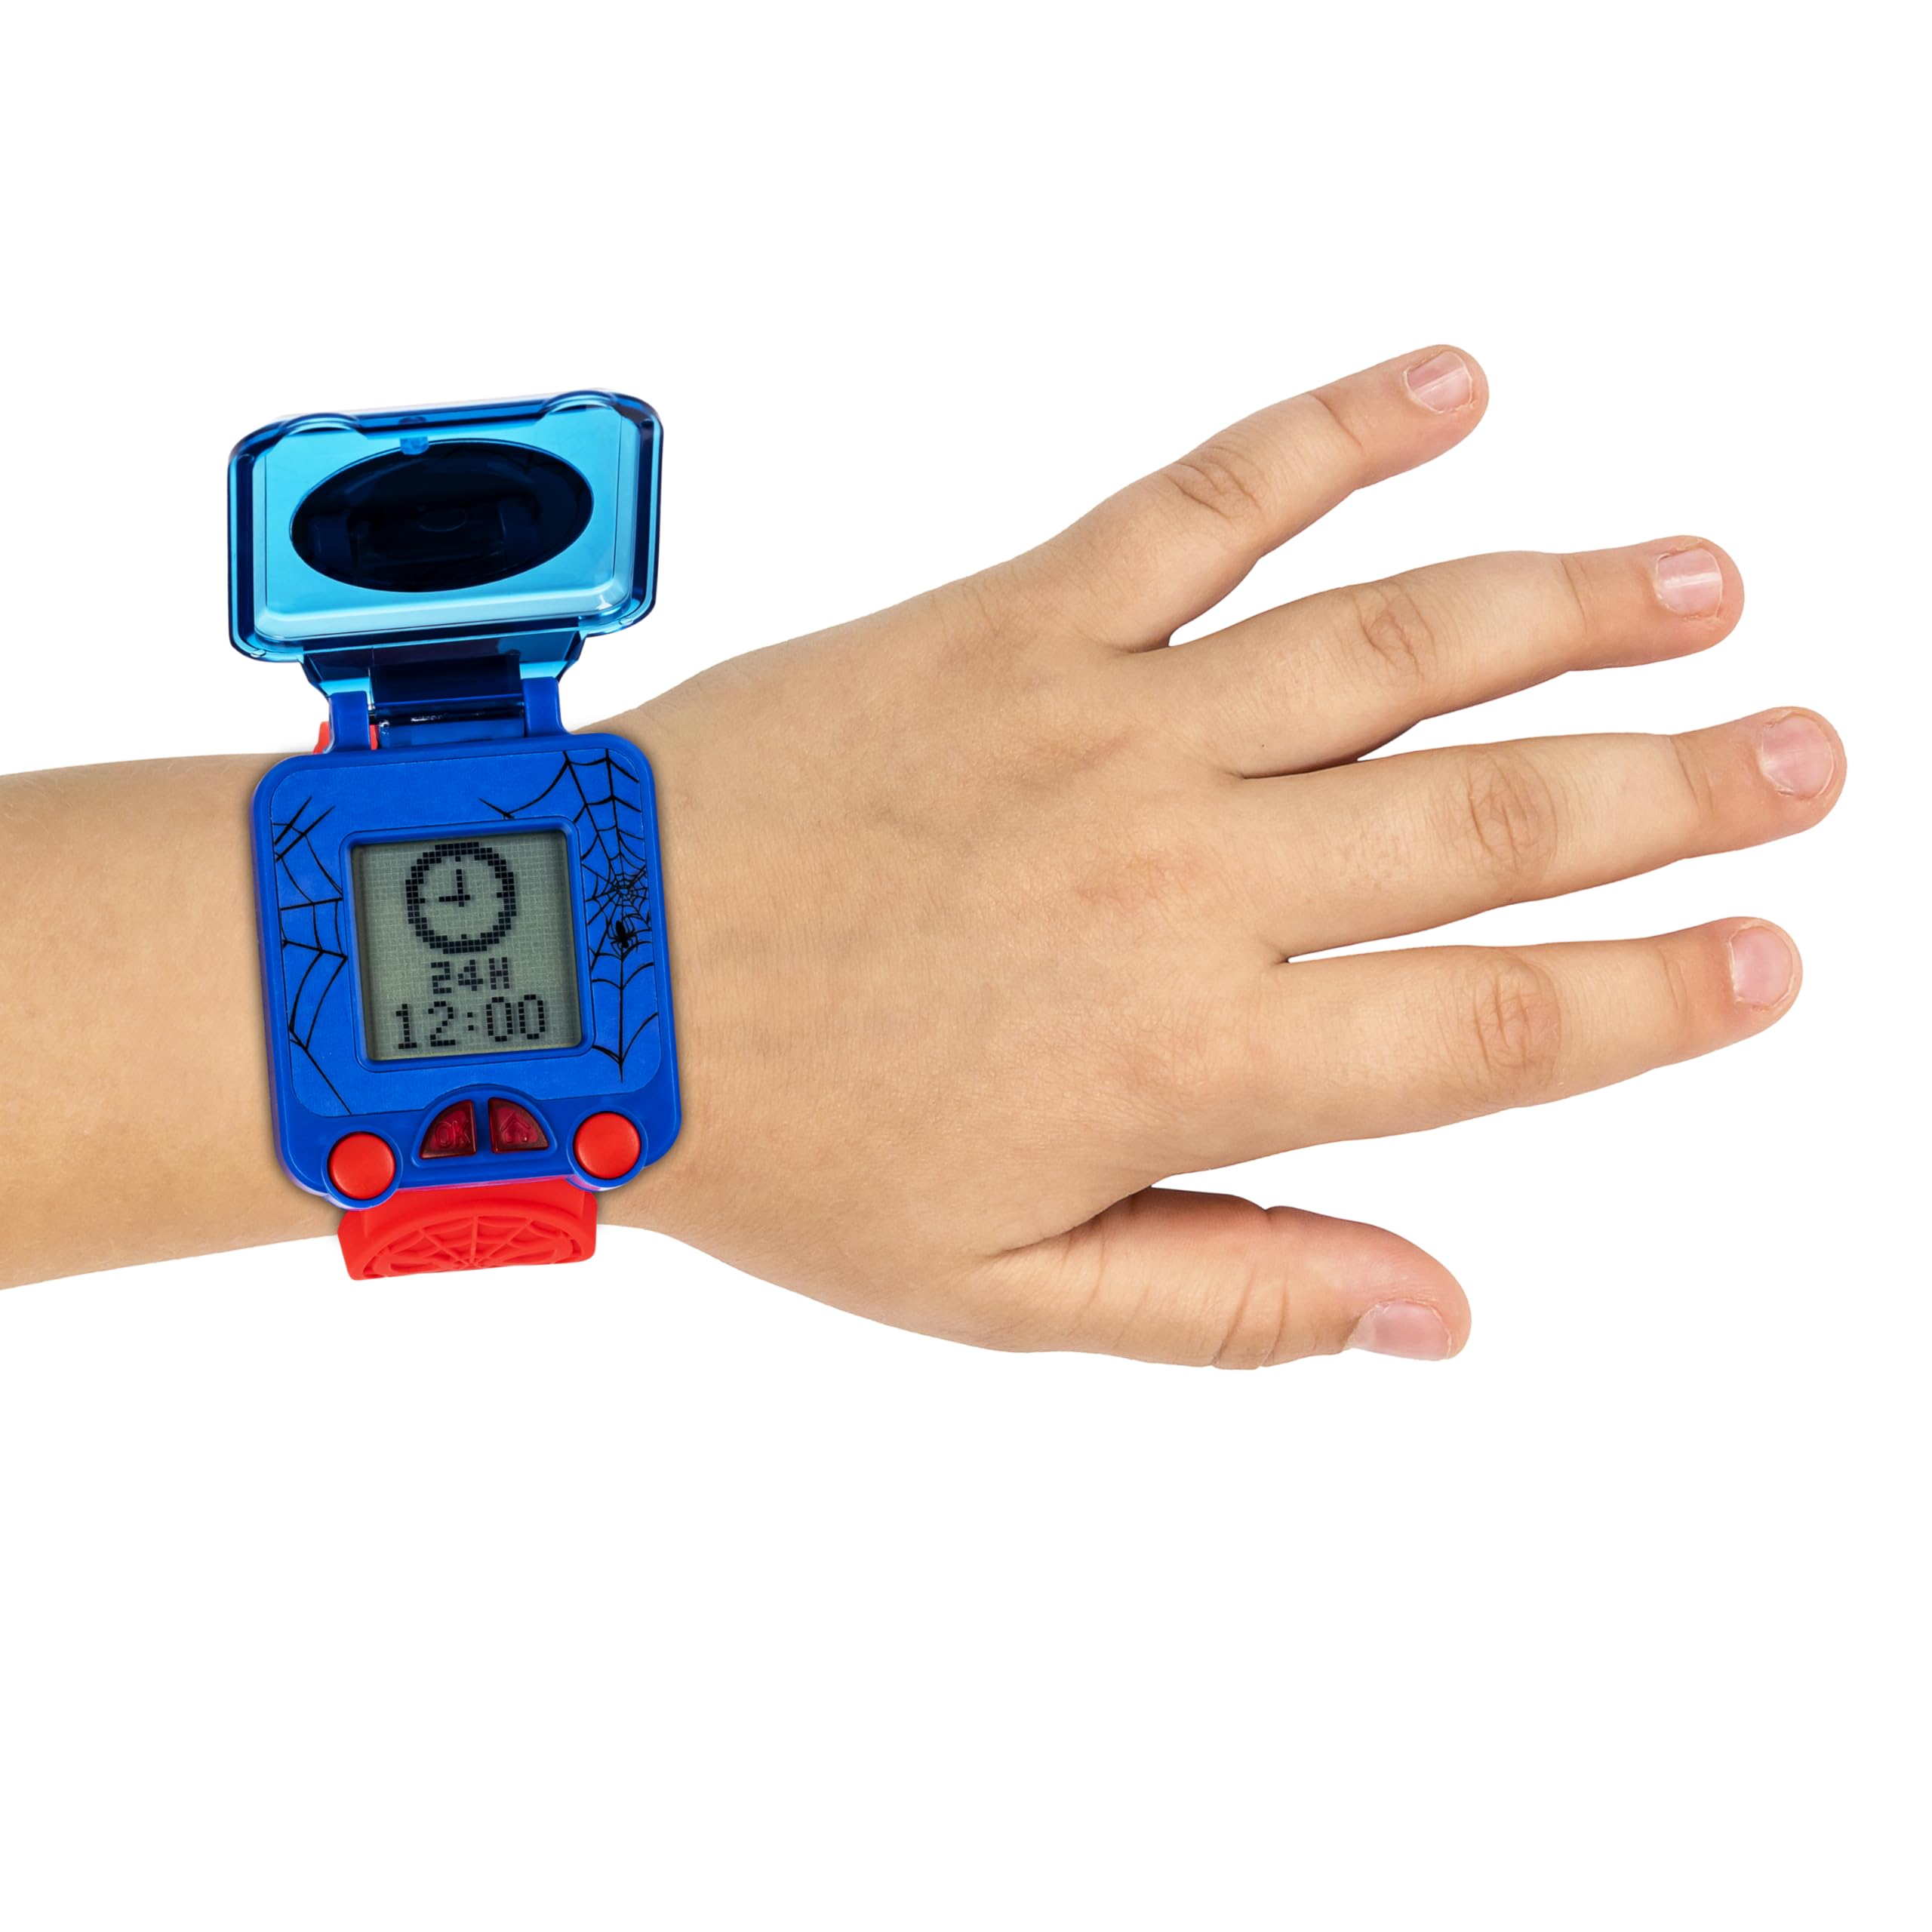 Accutime Marvel Spider-Man Educational Learning Digital Blue Watch for Boys, Toddlers, Kids with Red Strap - Includes Timer, Stopwatch, Alarm, Games and More! (Model: SPD4753AZ)